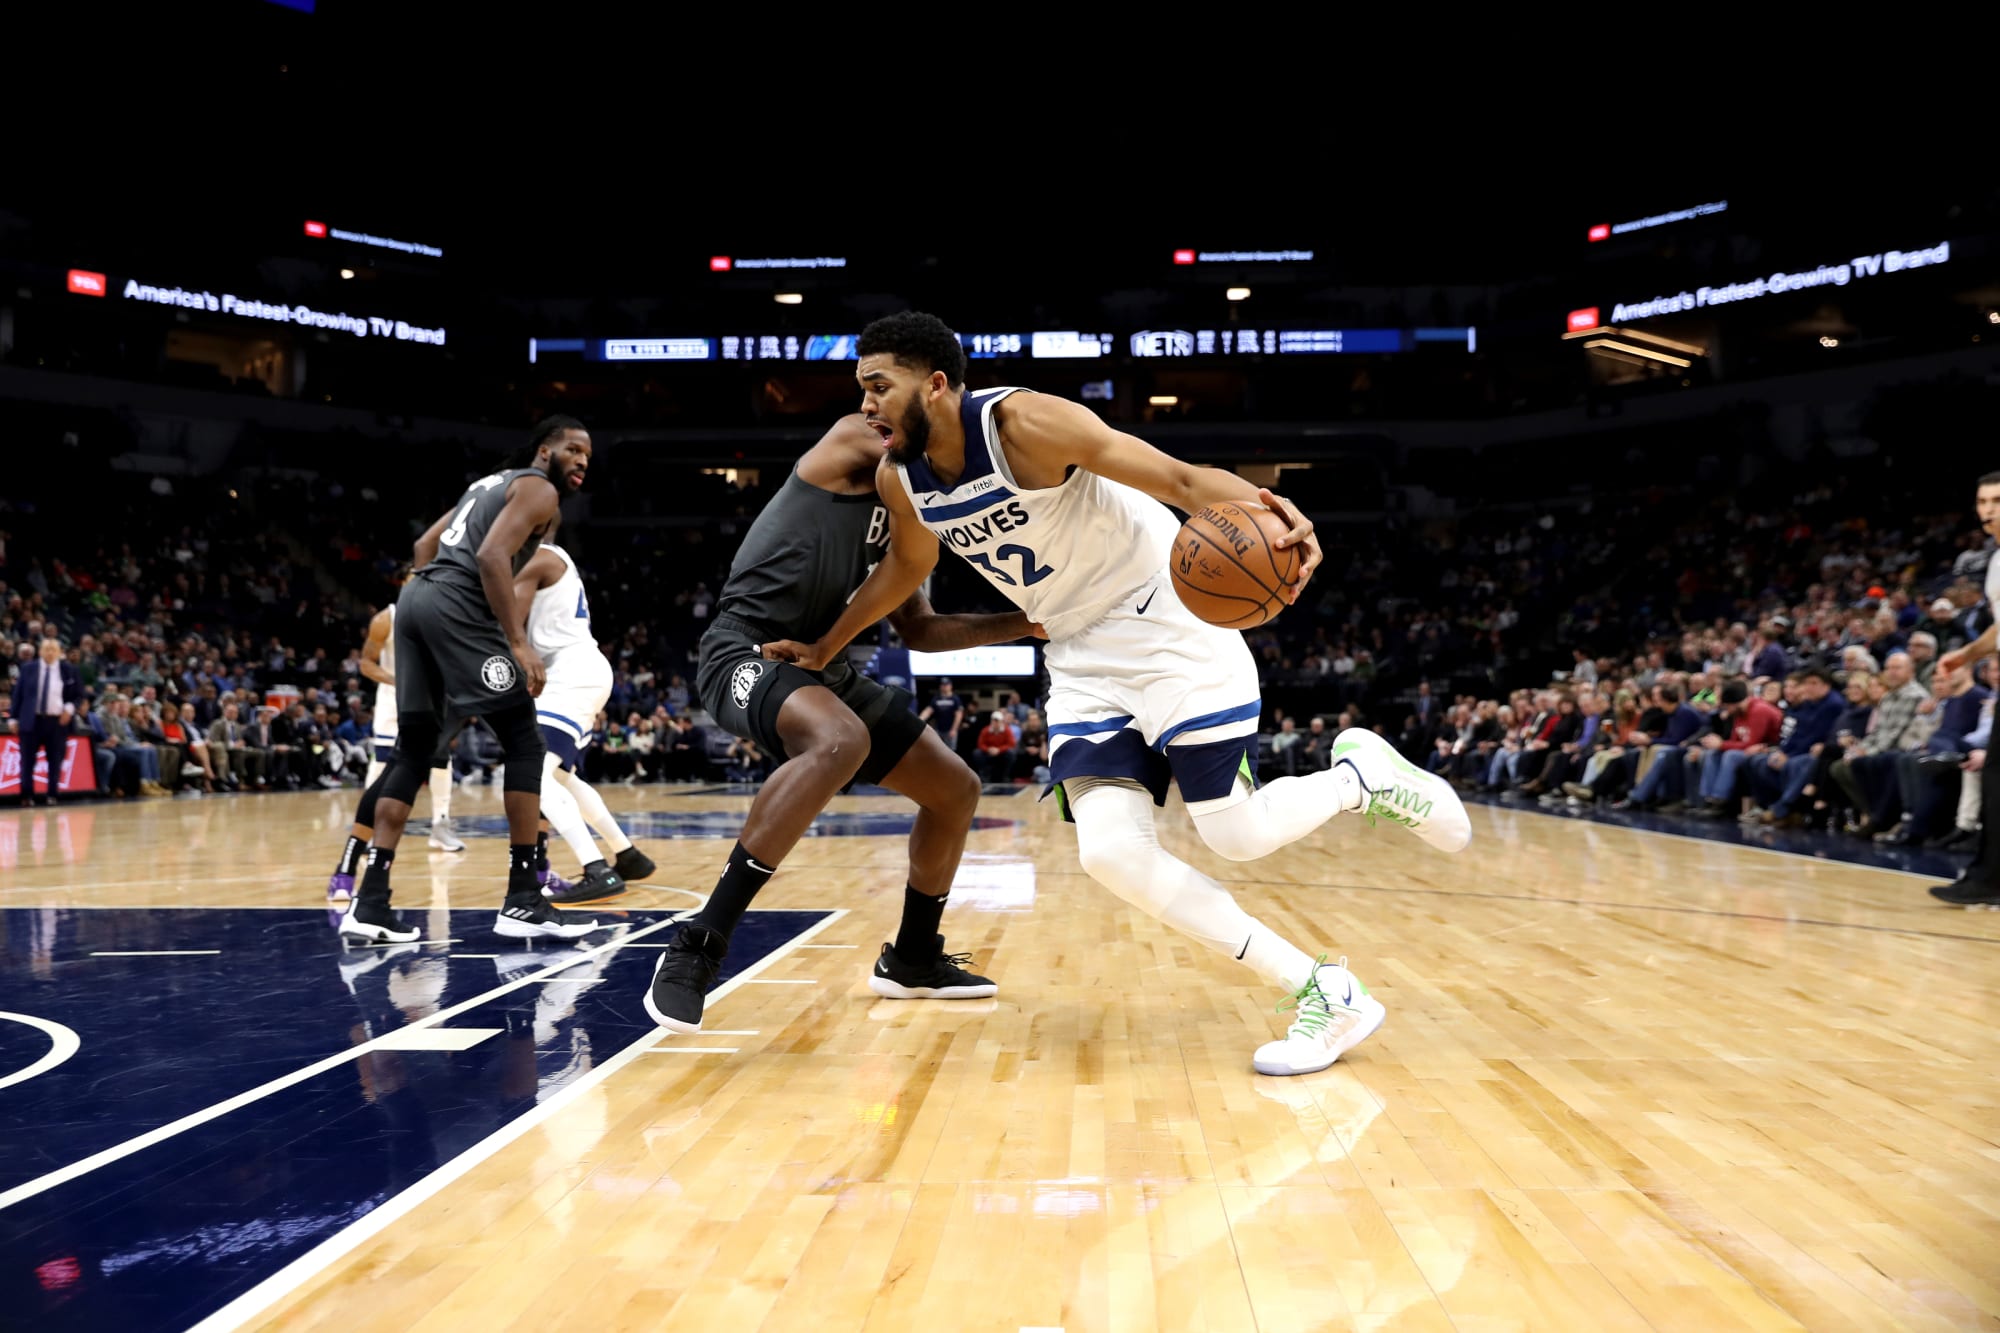 Minnesota Timberwolves Wolves win in first game without Jimmy Butler